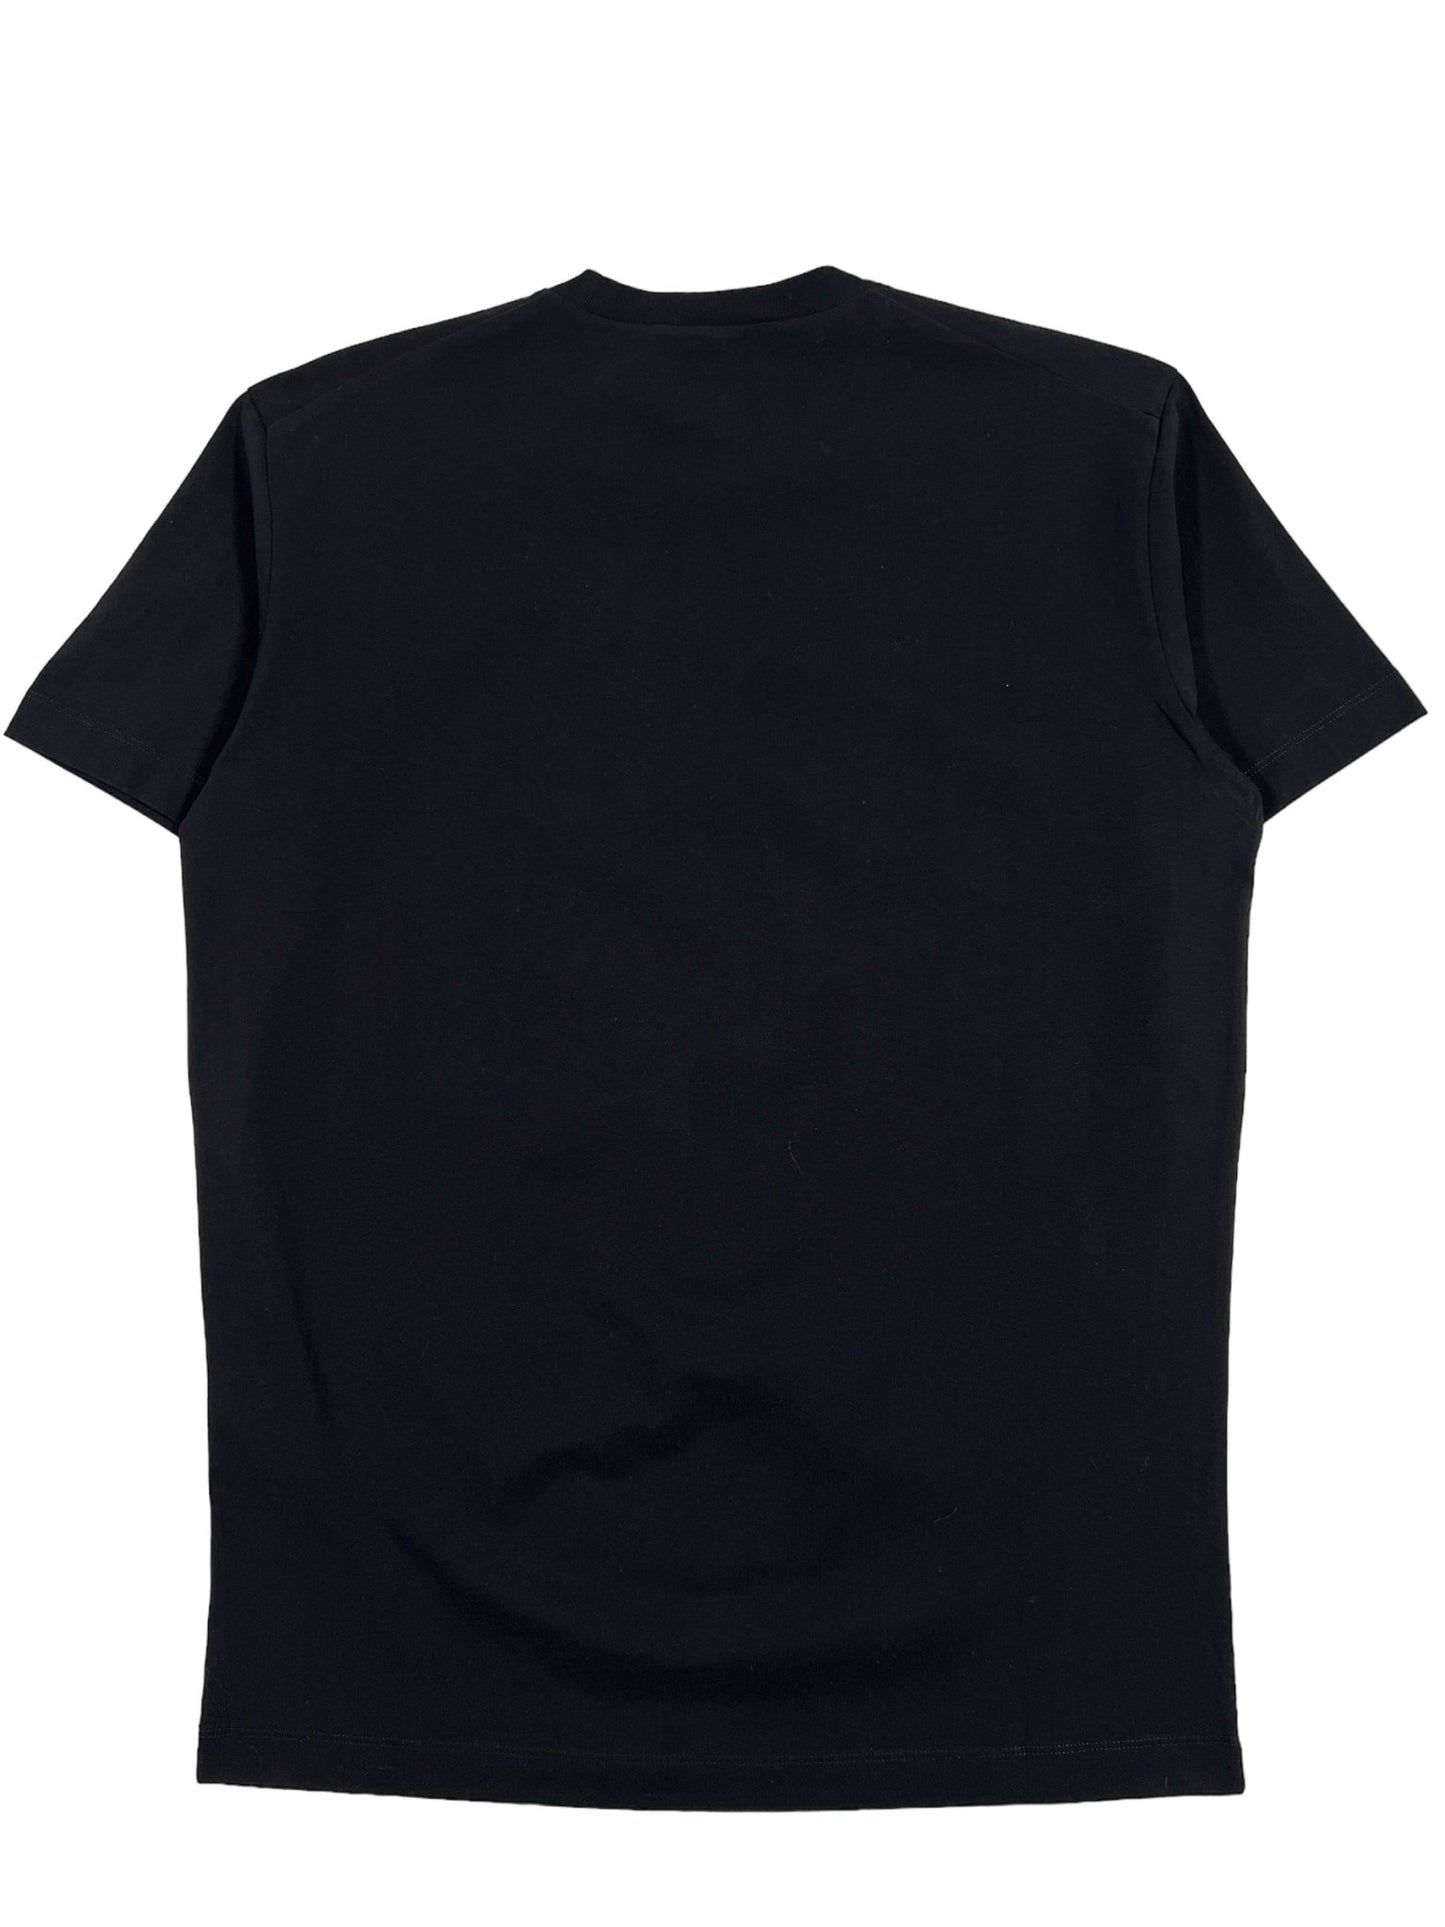 Probus DSQUARED2 S74GD1220 COOL FIT TEE BLACK DSQUARED2 S74GD1220 COOL FIT TEE BLACK M